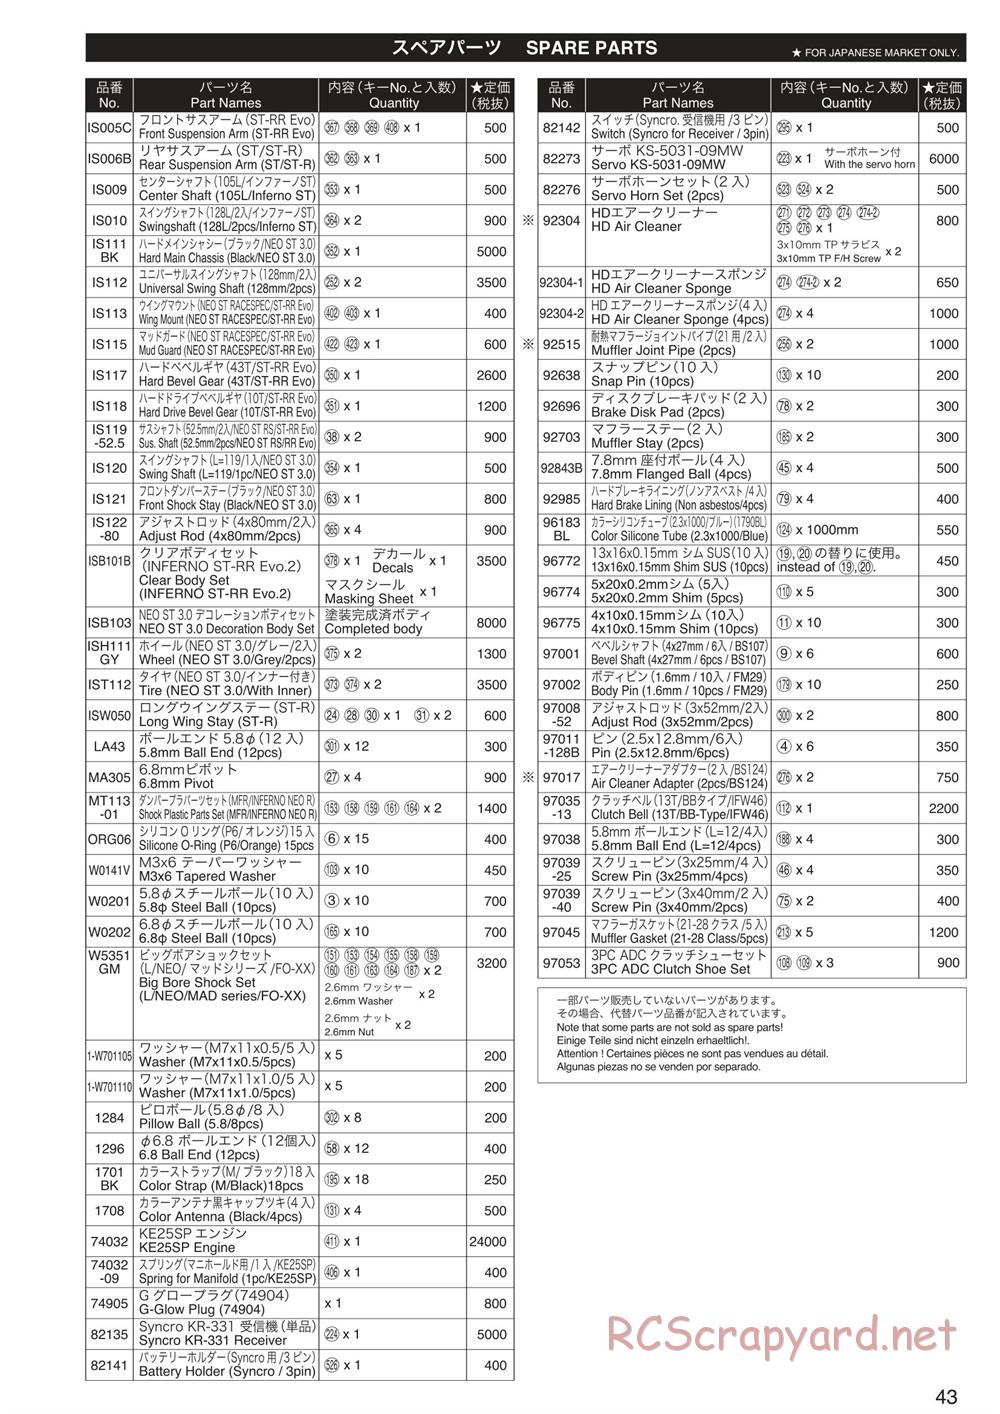 Kyosho - Inferno Neo ST 3.0 - Parts List - Page 2